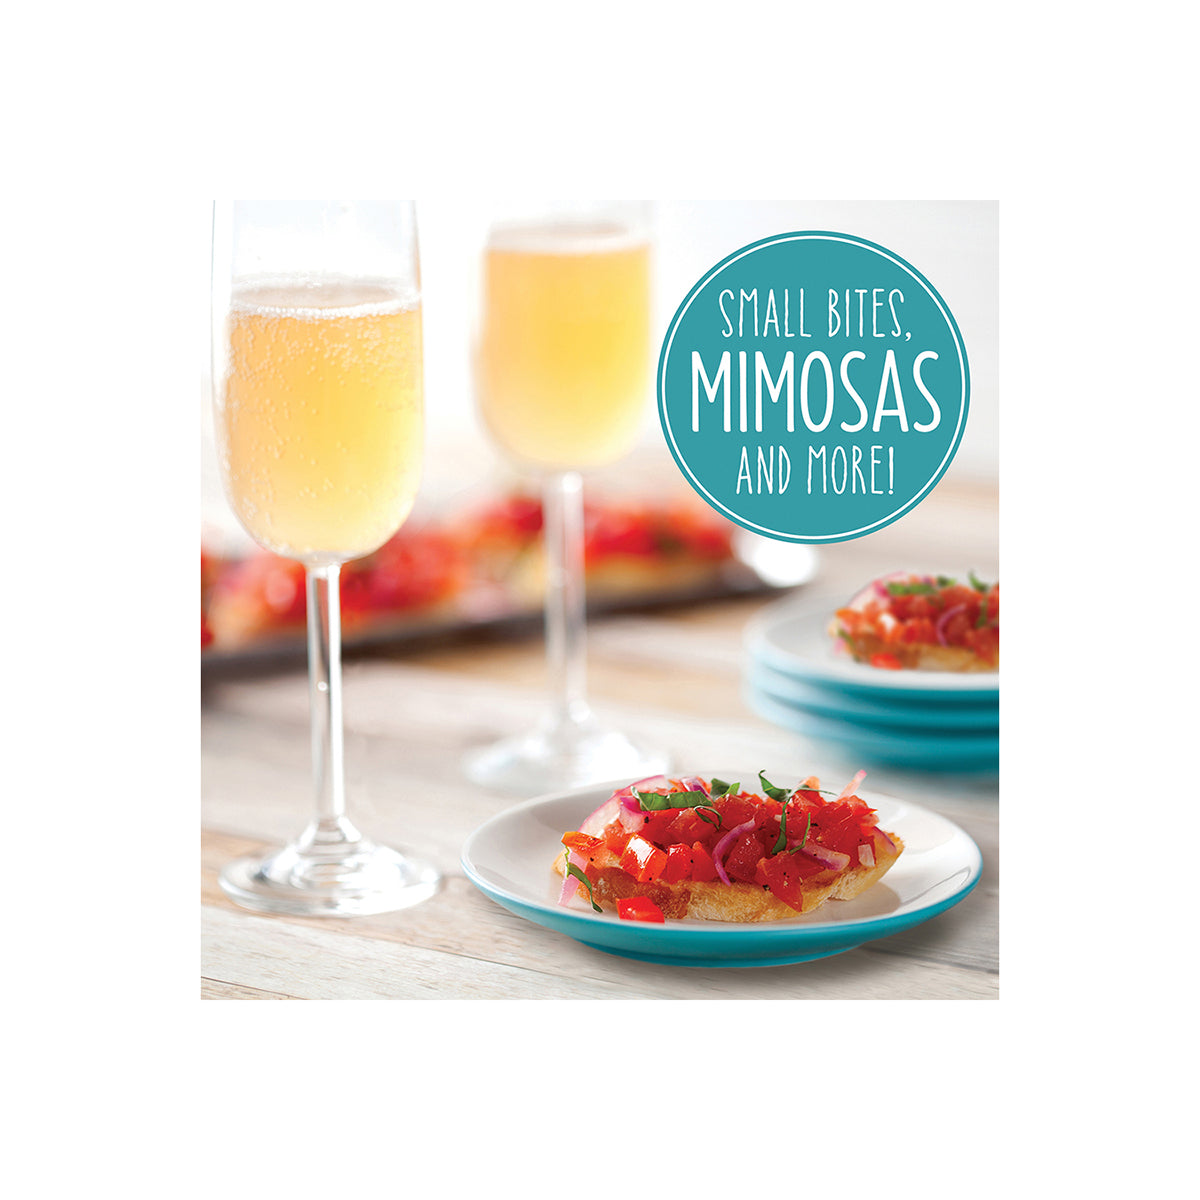 Small Bites Mimosas and More!